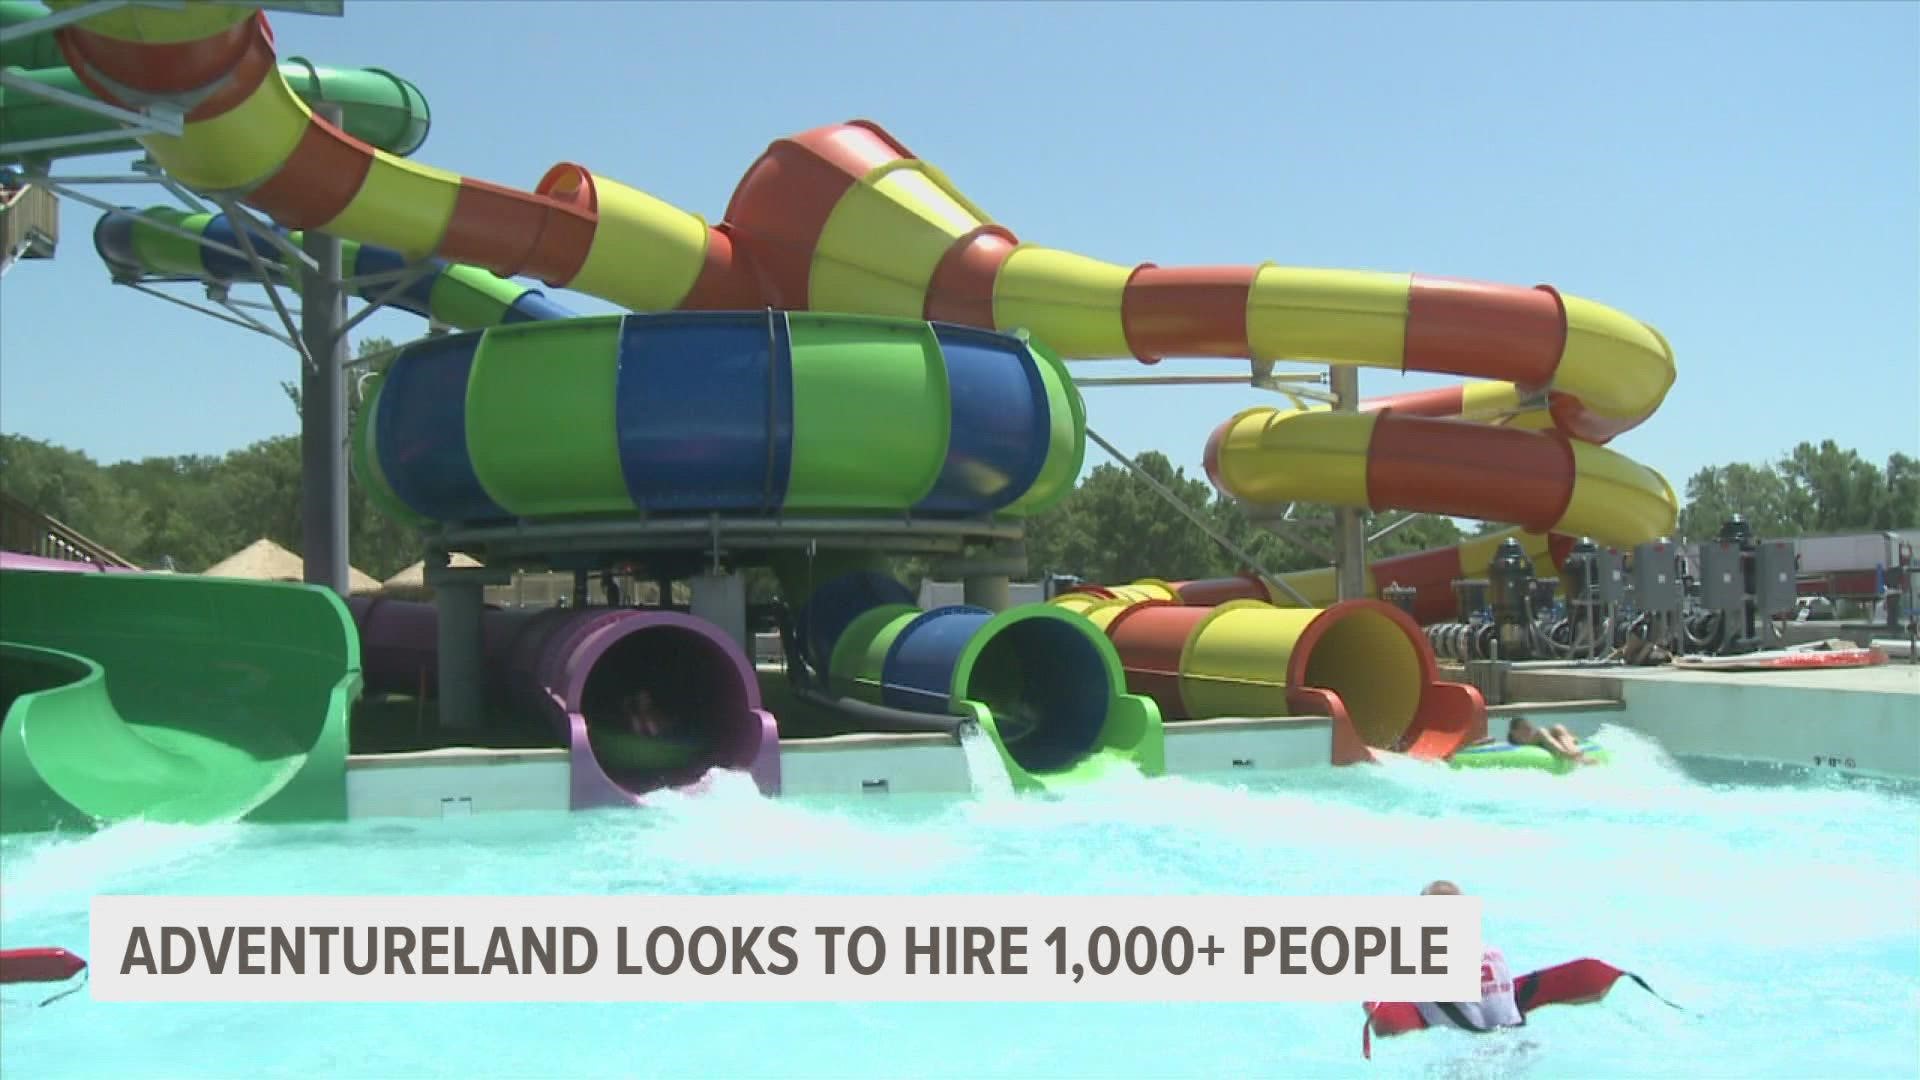 The amusement park said new hires ages 16 and up can make up to $15 per hour.